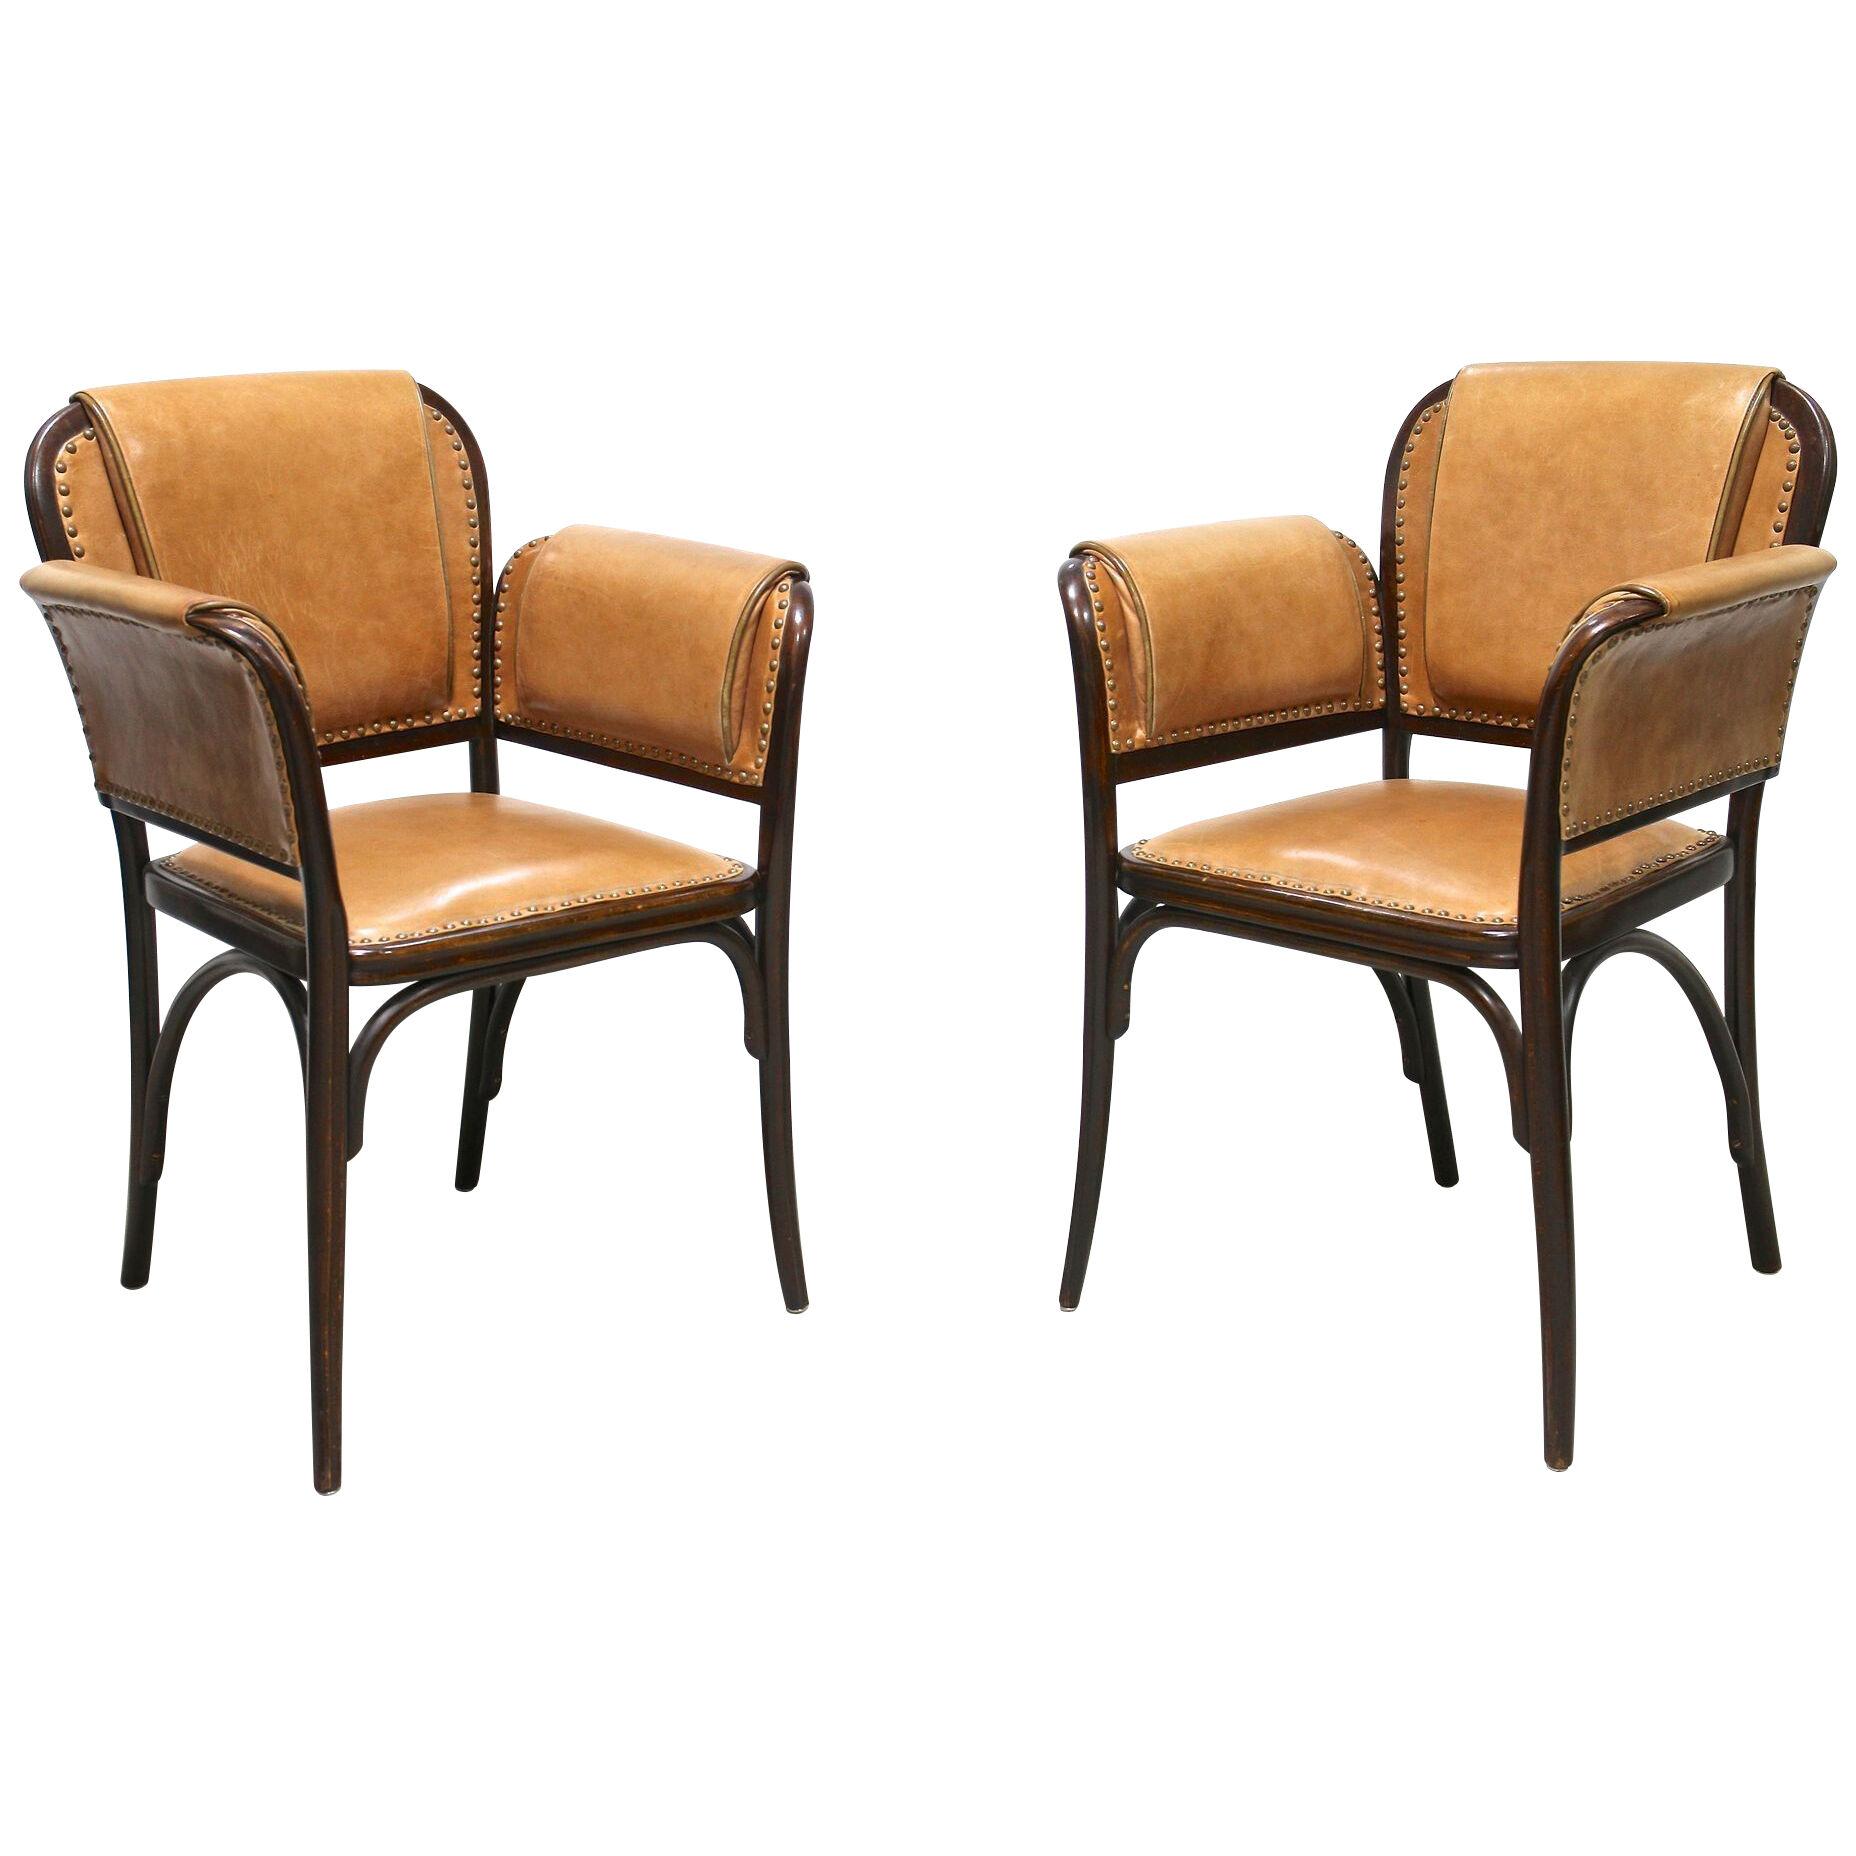 Pair Of 20th Century Art Nouveau Bentwood Armchairs by Thonet, Austria ca. 1904